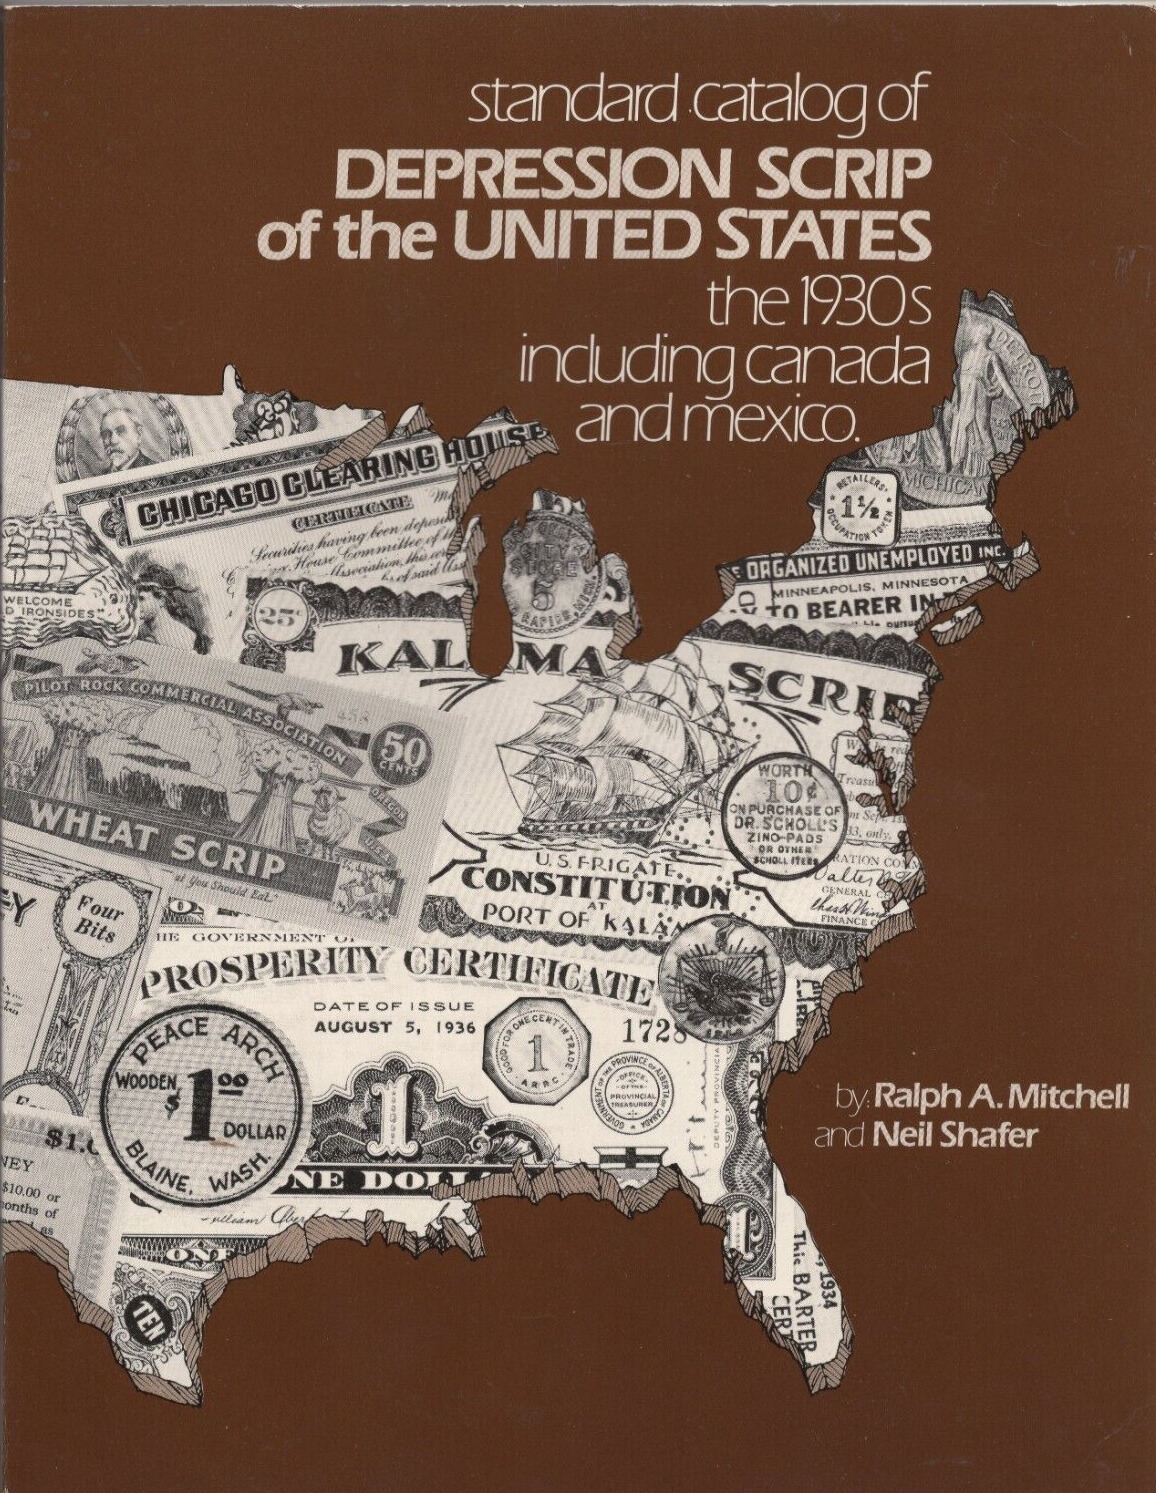 Standard Catalog of Depression Scrip of the United States the 1930s Including